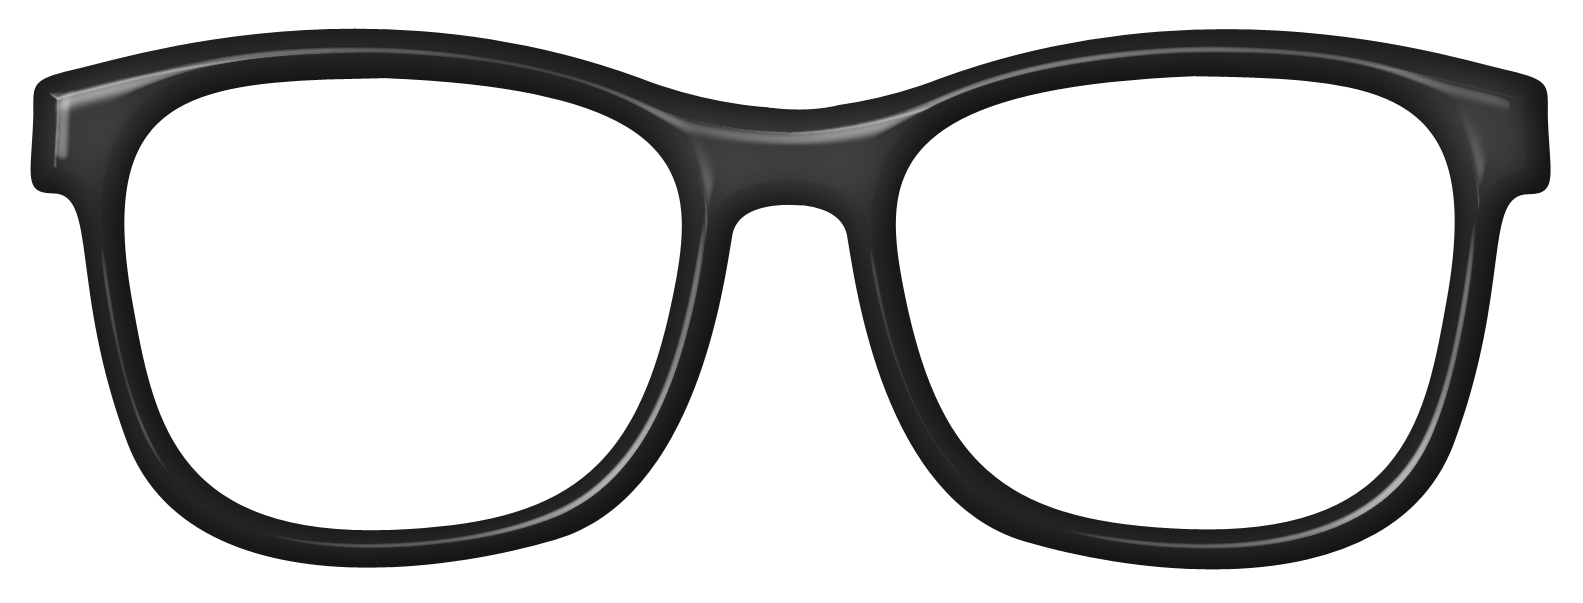 Optics Frame Spectacles Sunglasses Free Download PNG HD Clipart